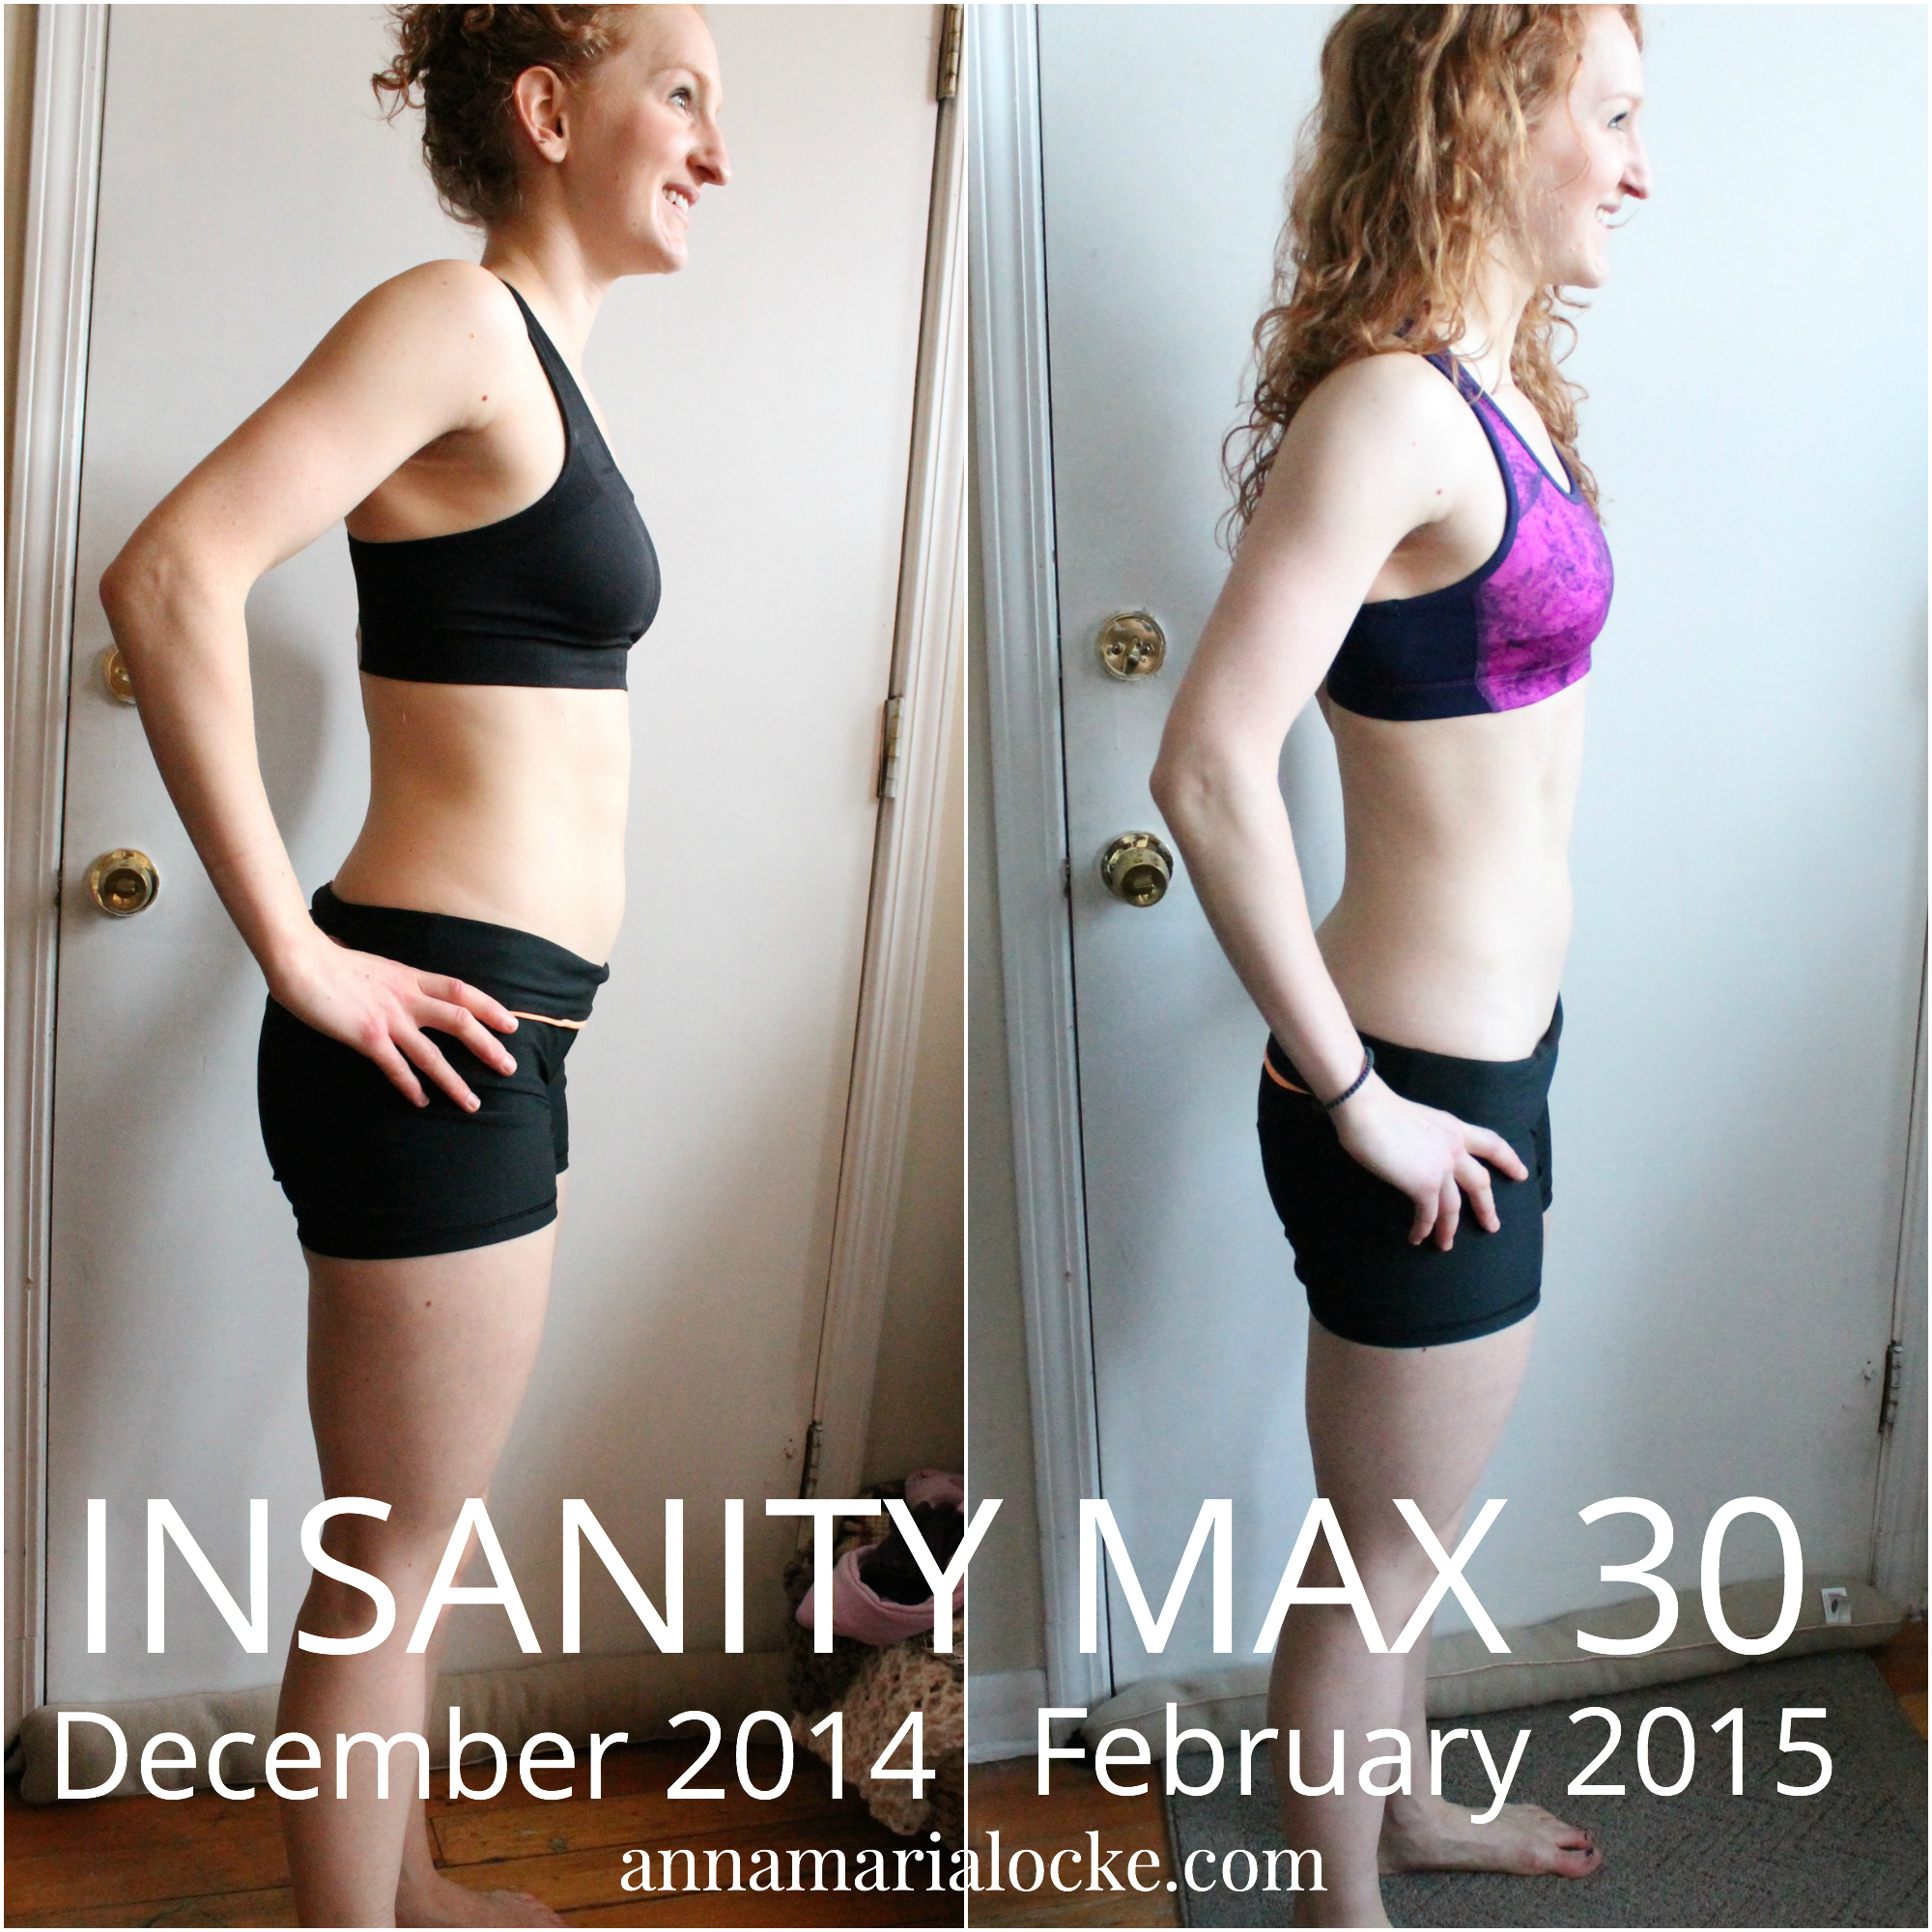 INSANITY MAX:30 Results: Haley Lost 17 My Journey with INSANITY MAX:30 - Em...